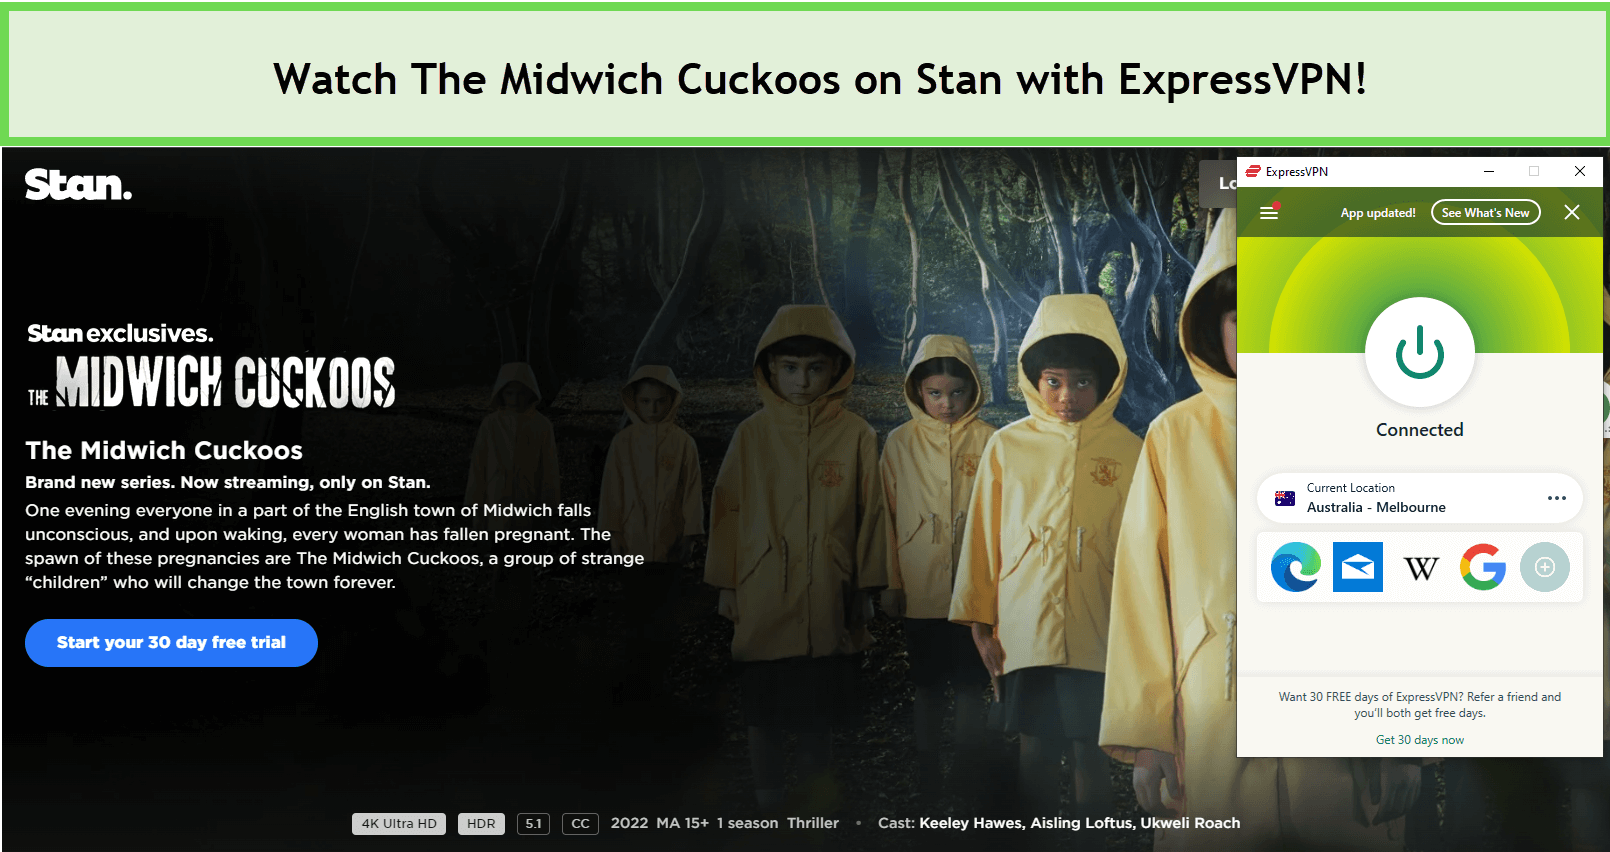 Watch-The-Midwich-Cuckoos-outside-Australia-on-Stan-with-ExpressVPN